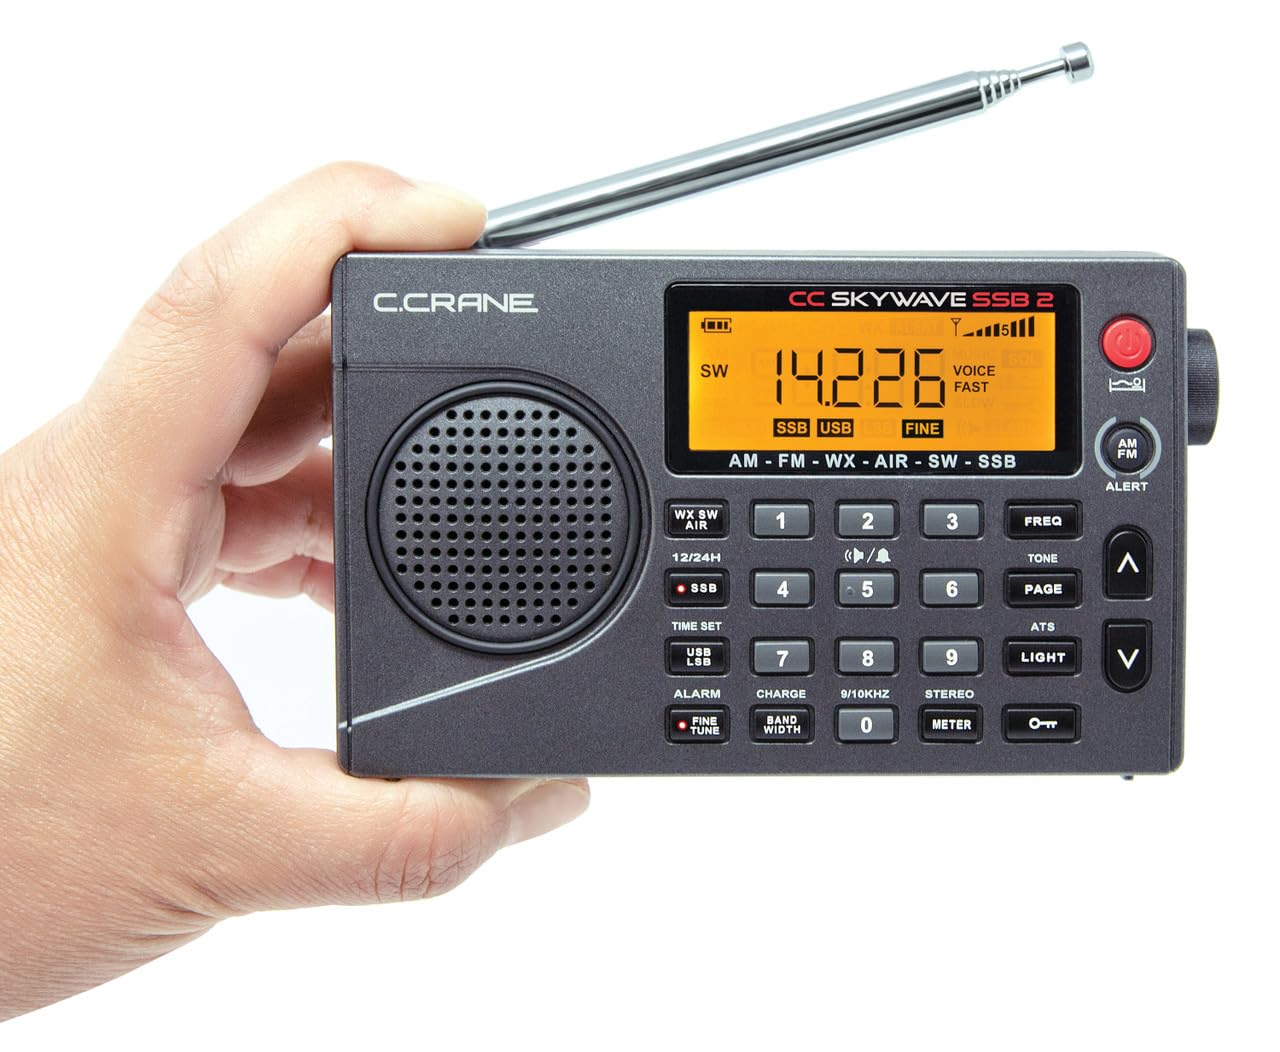 C. Crane CC Skywave SSB 2 AM, FM, Shortwave, NOAA Weather + Alert, Scannable VHF Aviation Band and Single Side Bands Small Battery Operated Portable Travel Radio Includes SW Wire Antenna Adapter